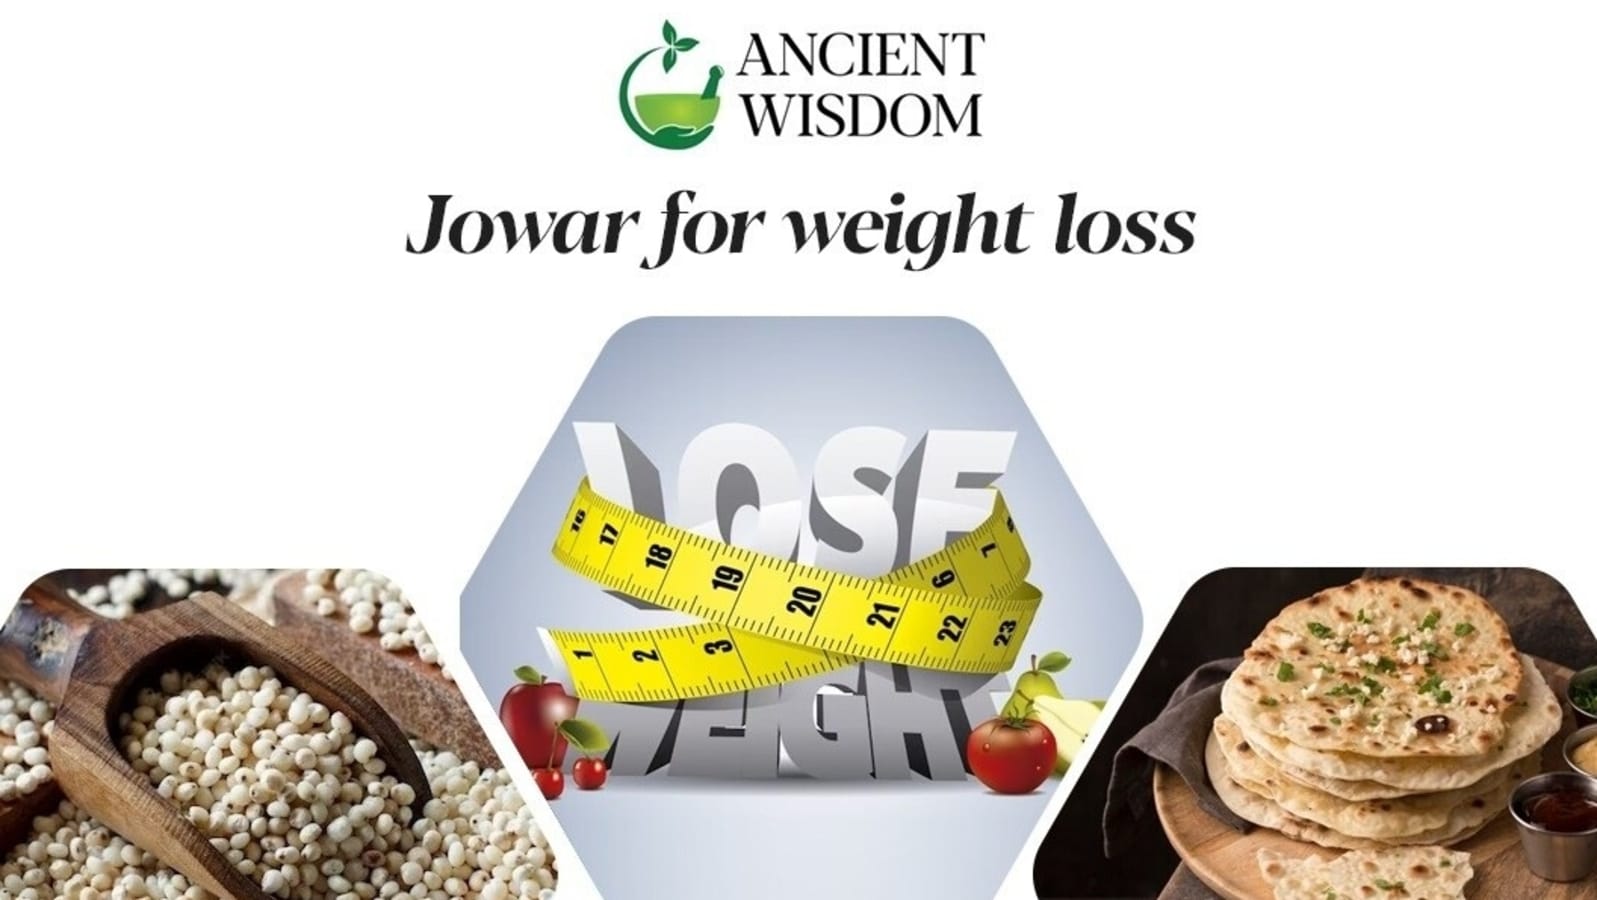 Ancient Wisdom Part 18: How to lose weight with jowar;  how to add to your diet and its amazing health benefits